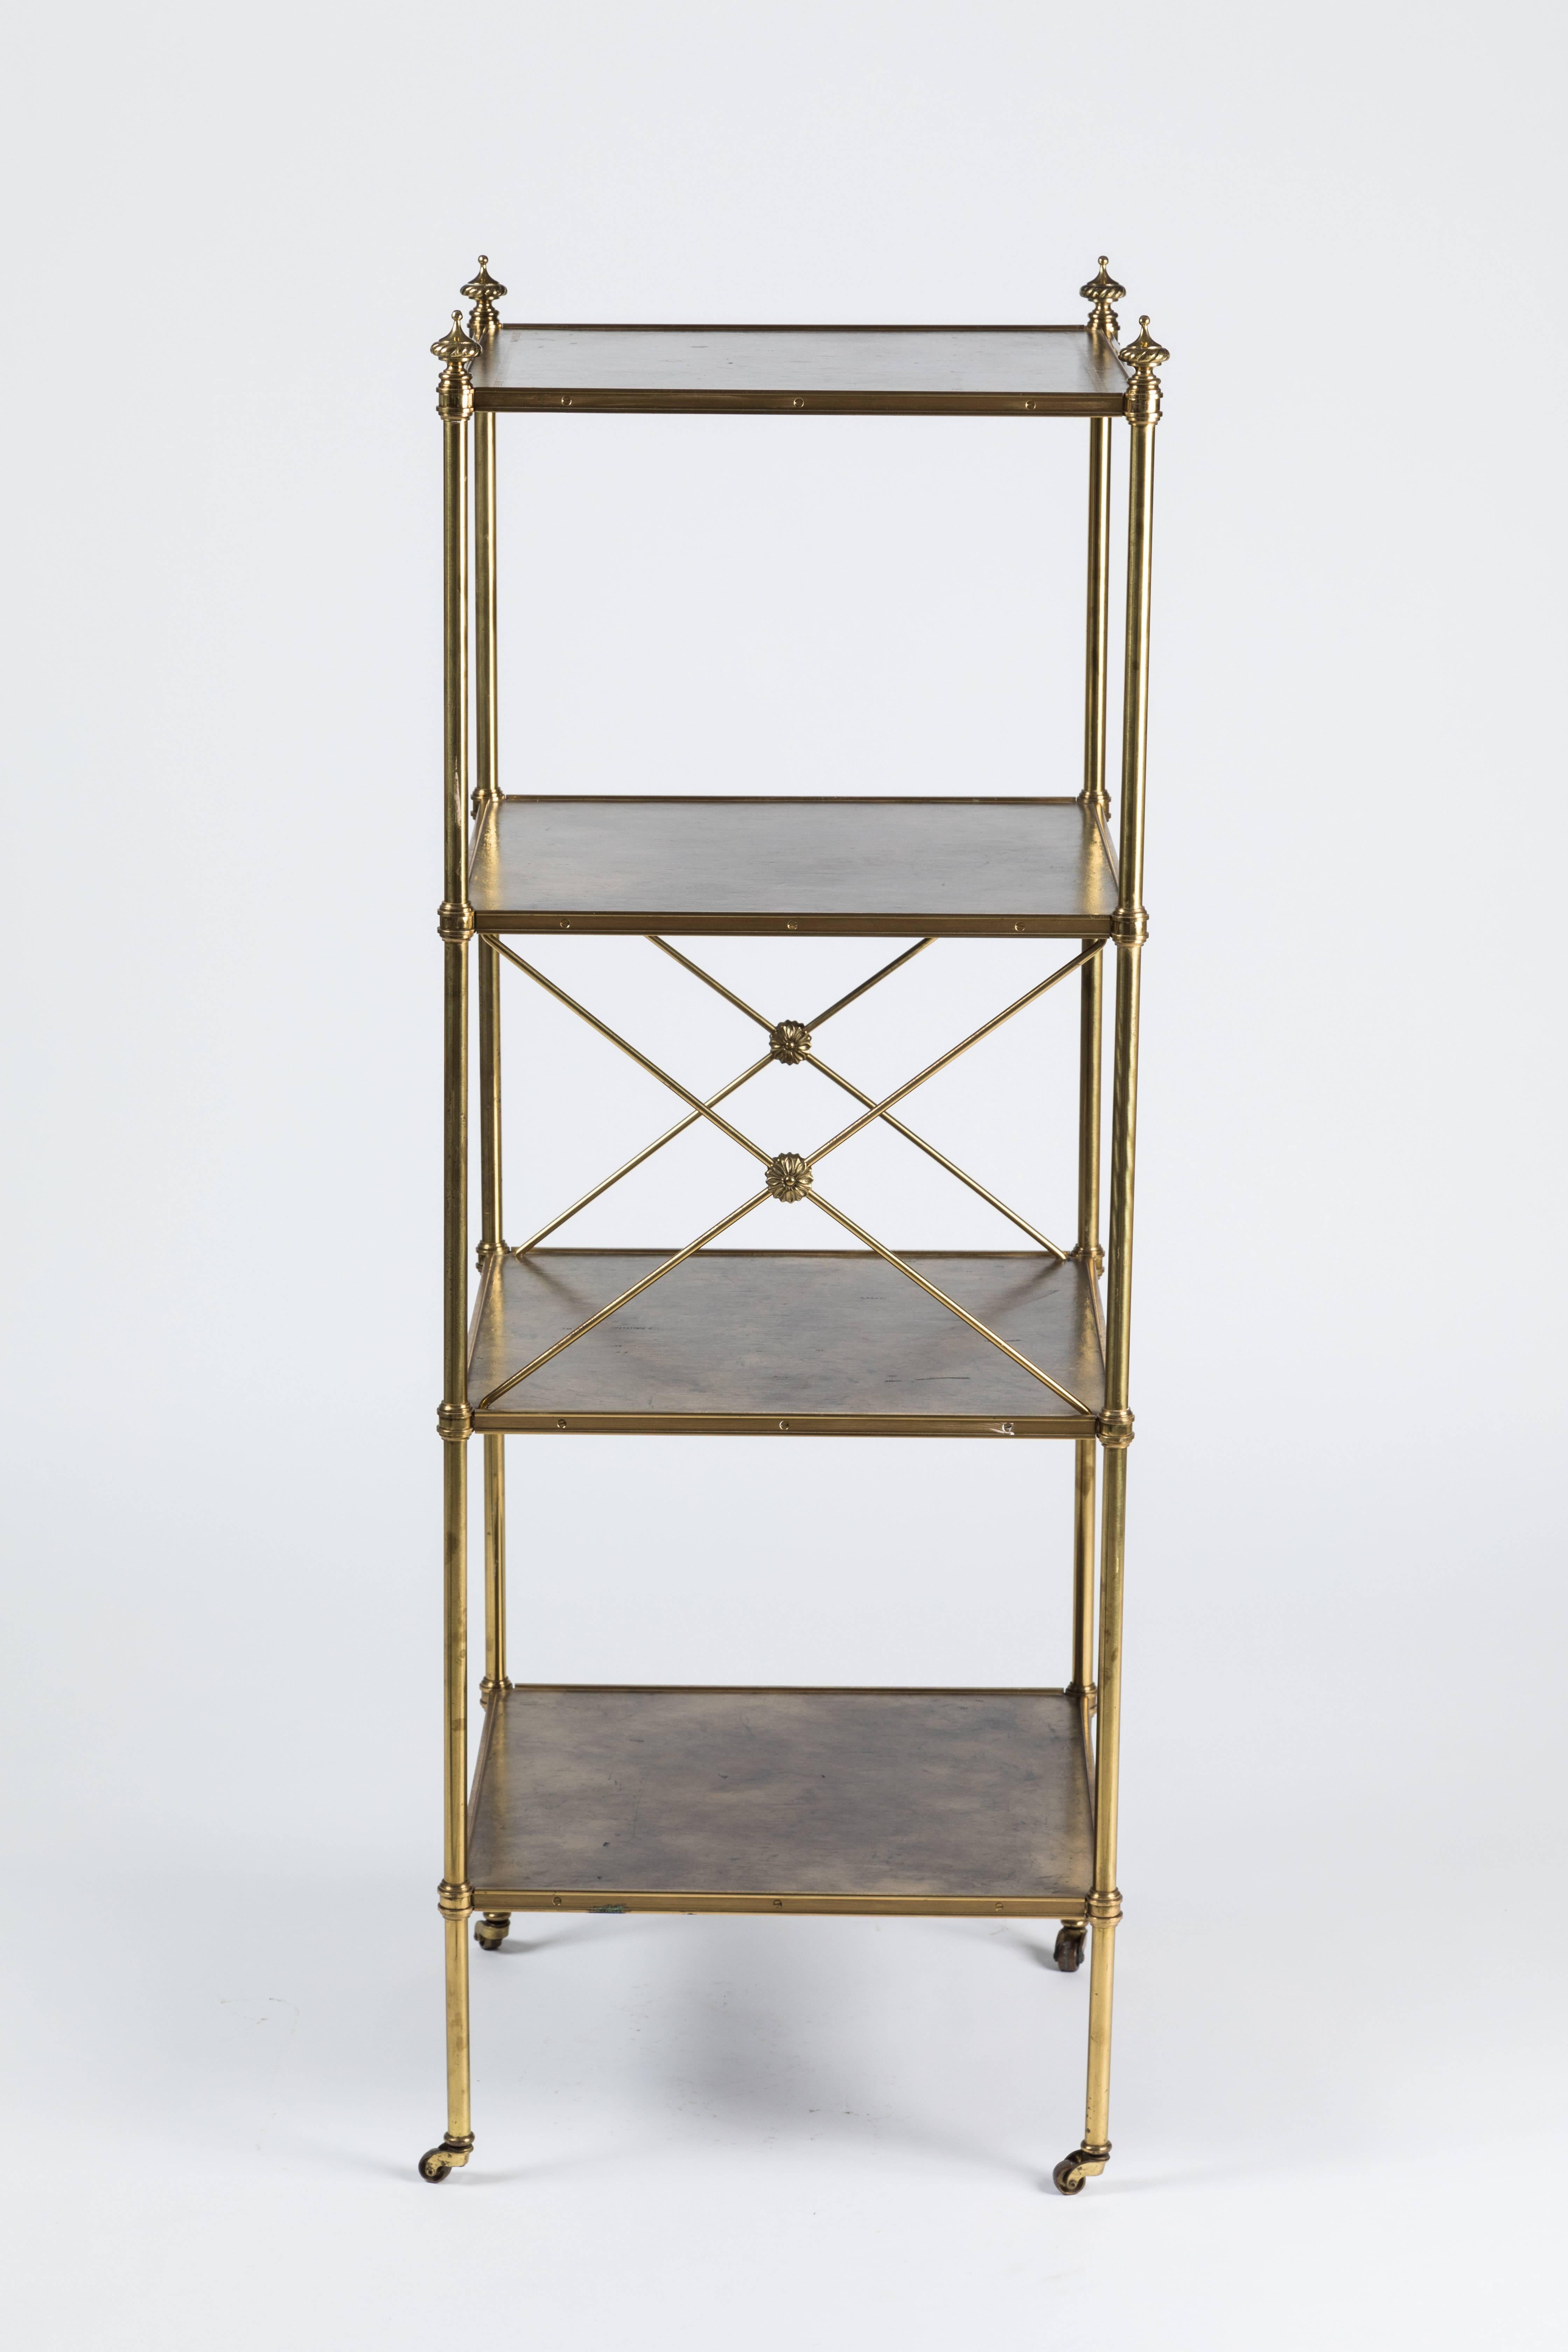 20th Century Empire Style Brass and Leather Etagere by Baker